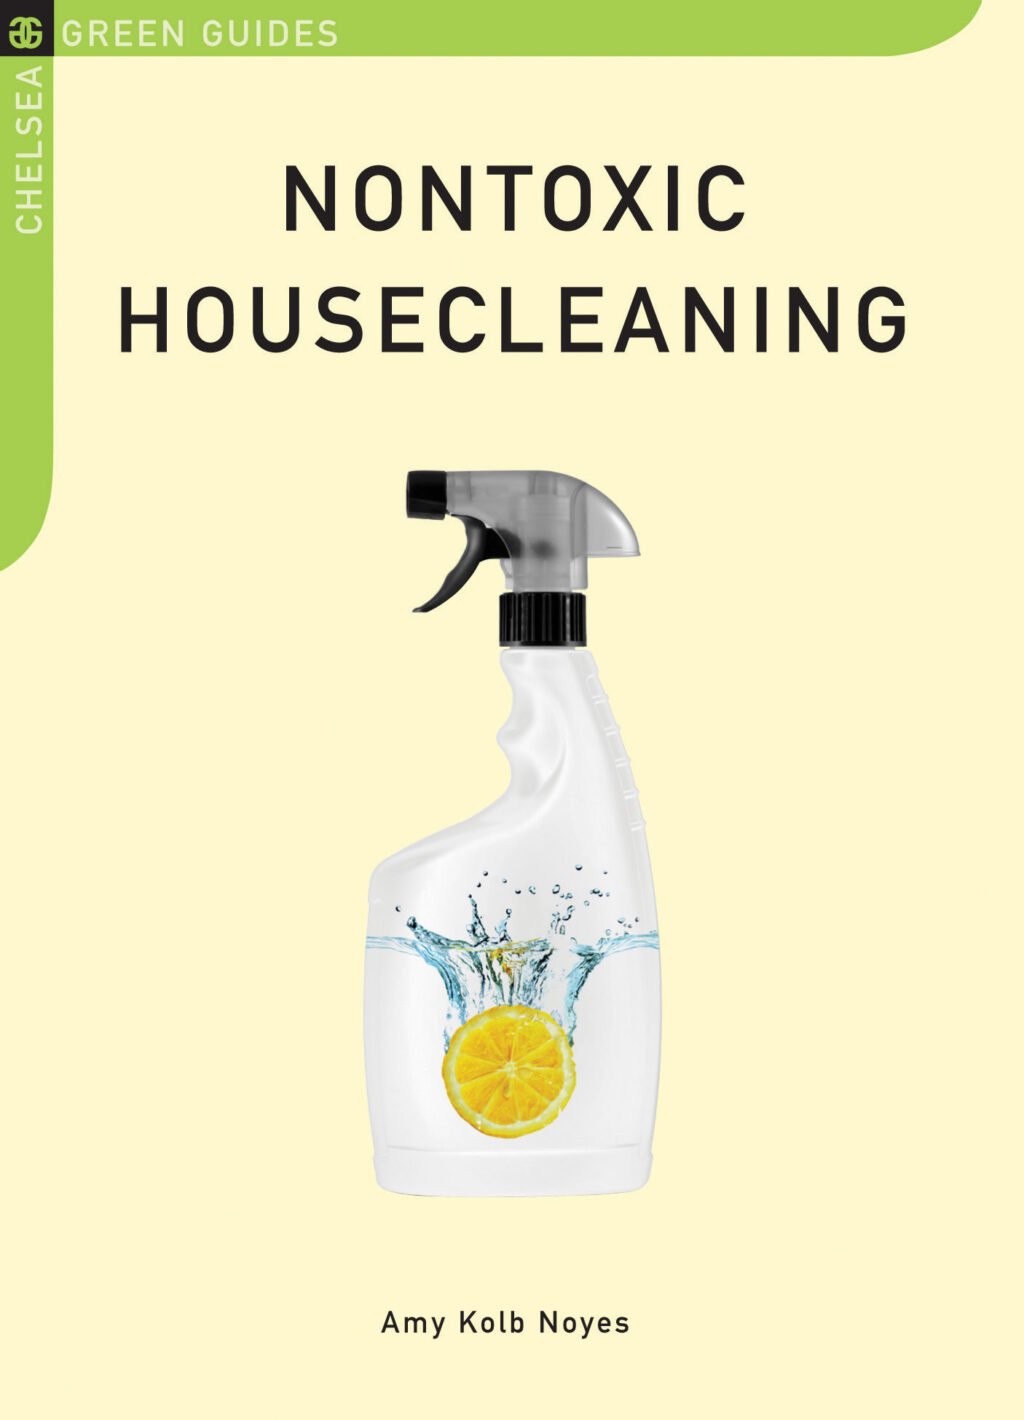 The Nontoxic Housecleaning cover